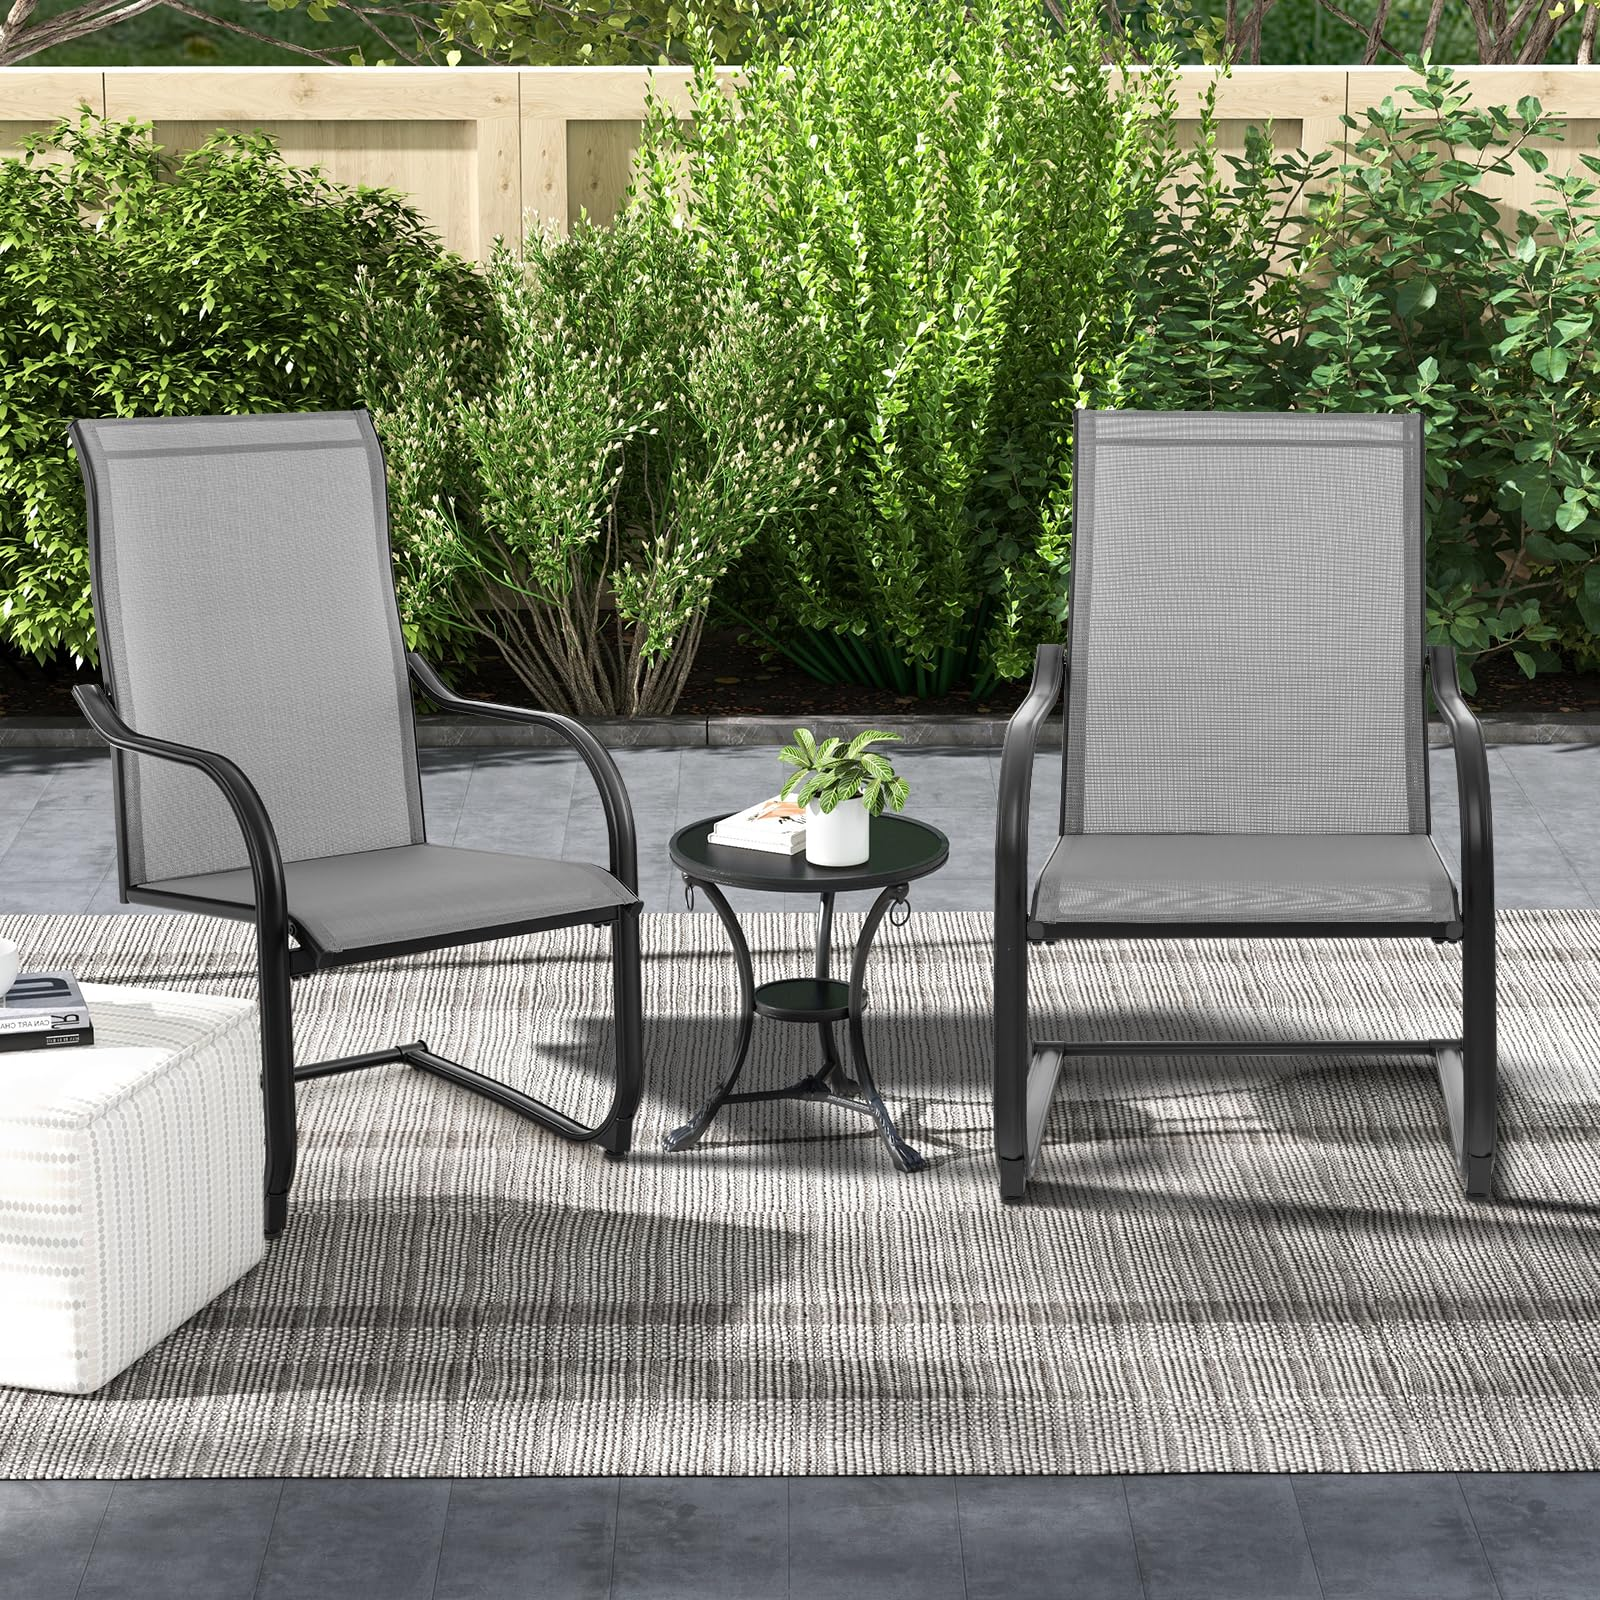 Giantex Patio Chairs Set of 2, High Back Outdoor Chairs w/Sled Base, All Weather Fabric